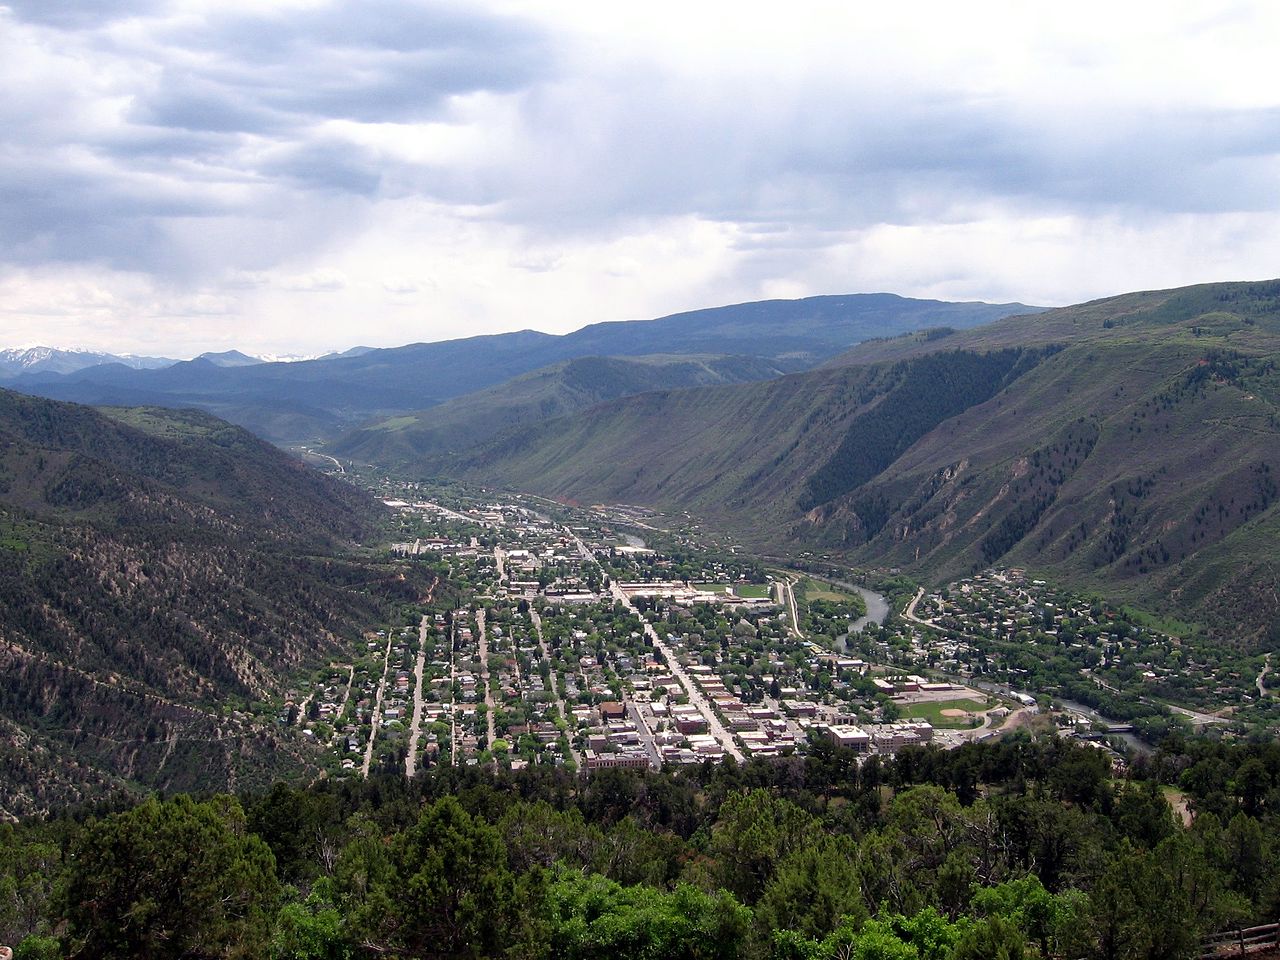 Glenwood Springs – The Ultimate Vacation Town